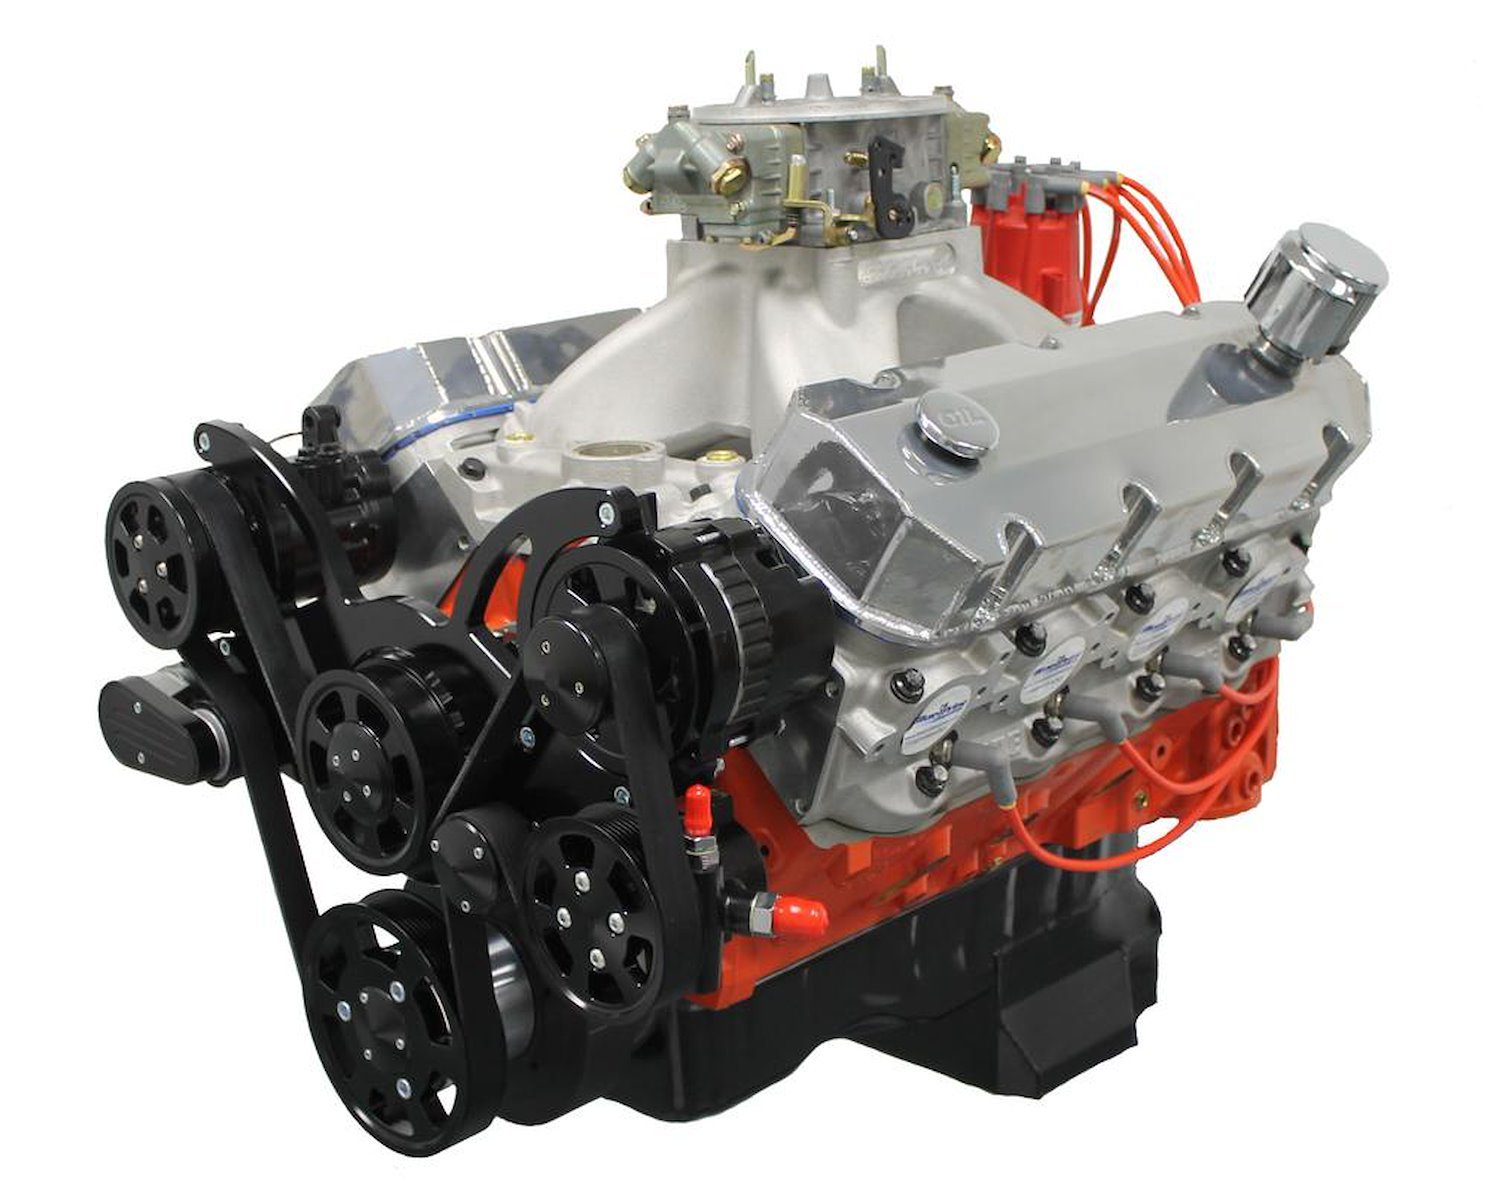 Pro Series Big Block Chevy 540 ci Drop-In Ready Crate Engine [670 HP | 660 ft.-lbs. of TQ]